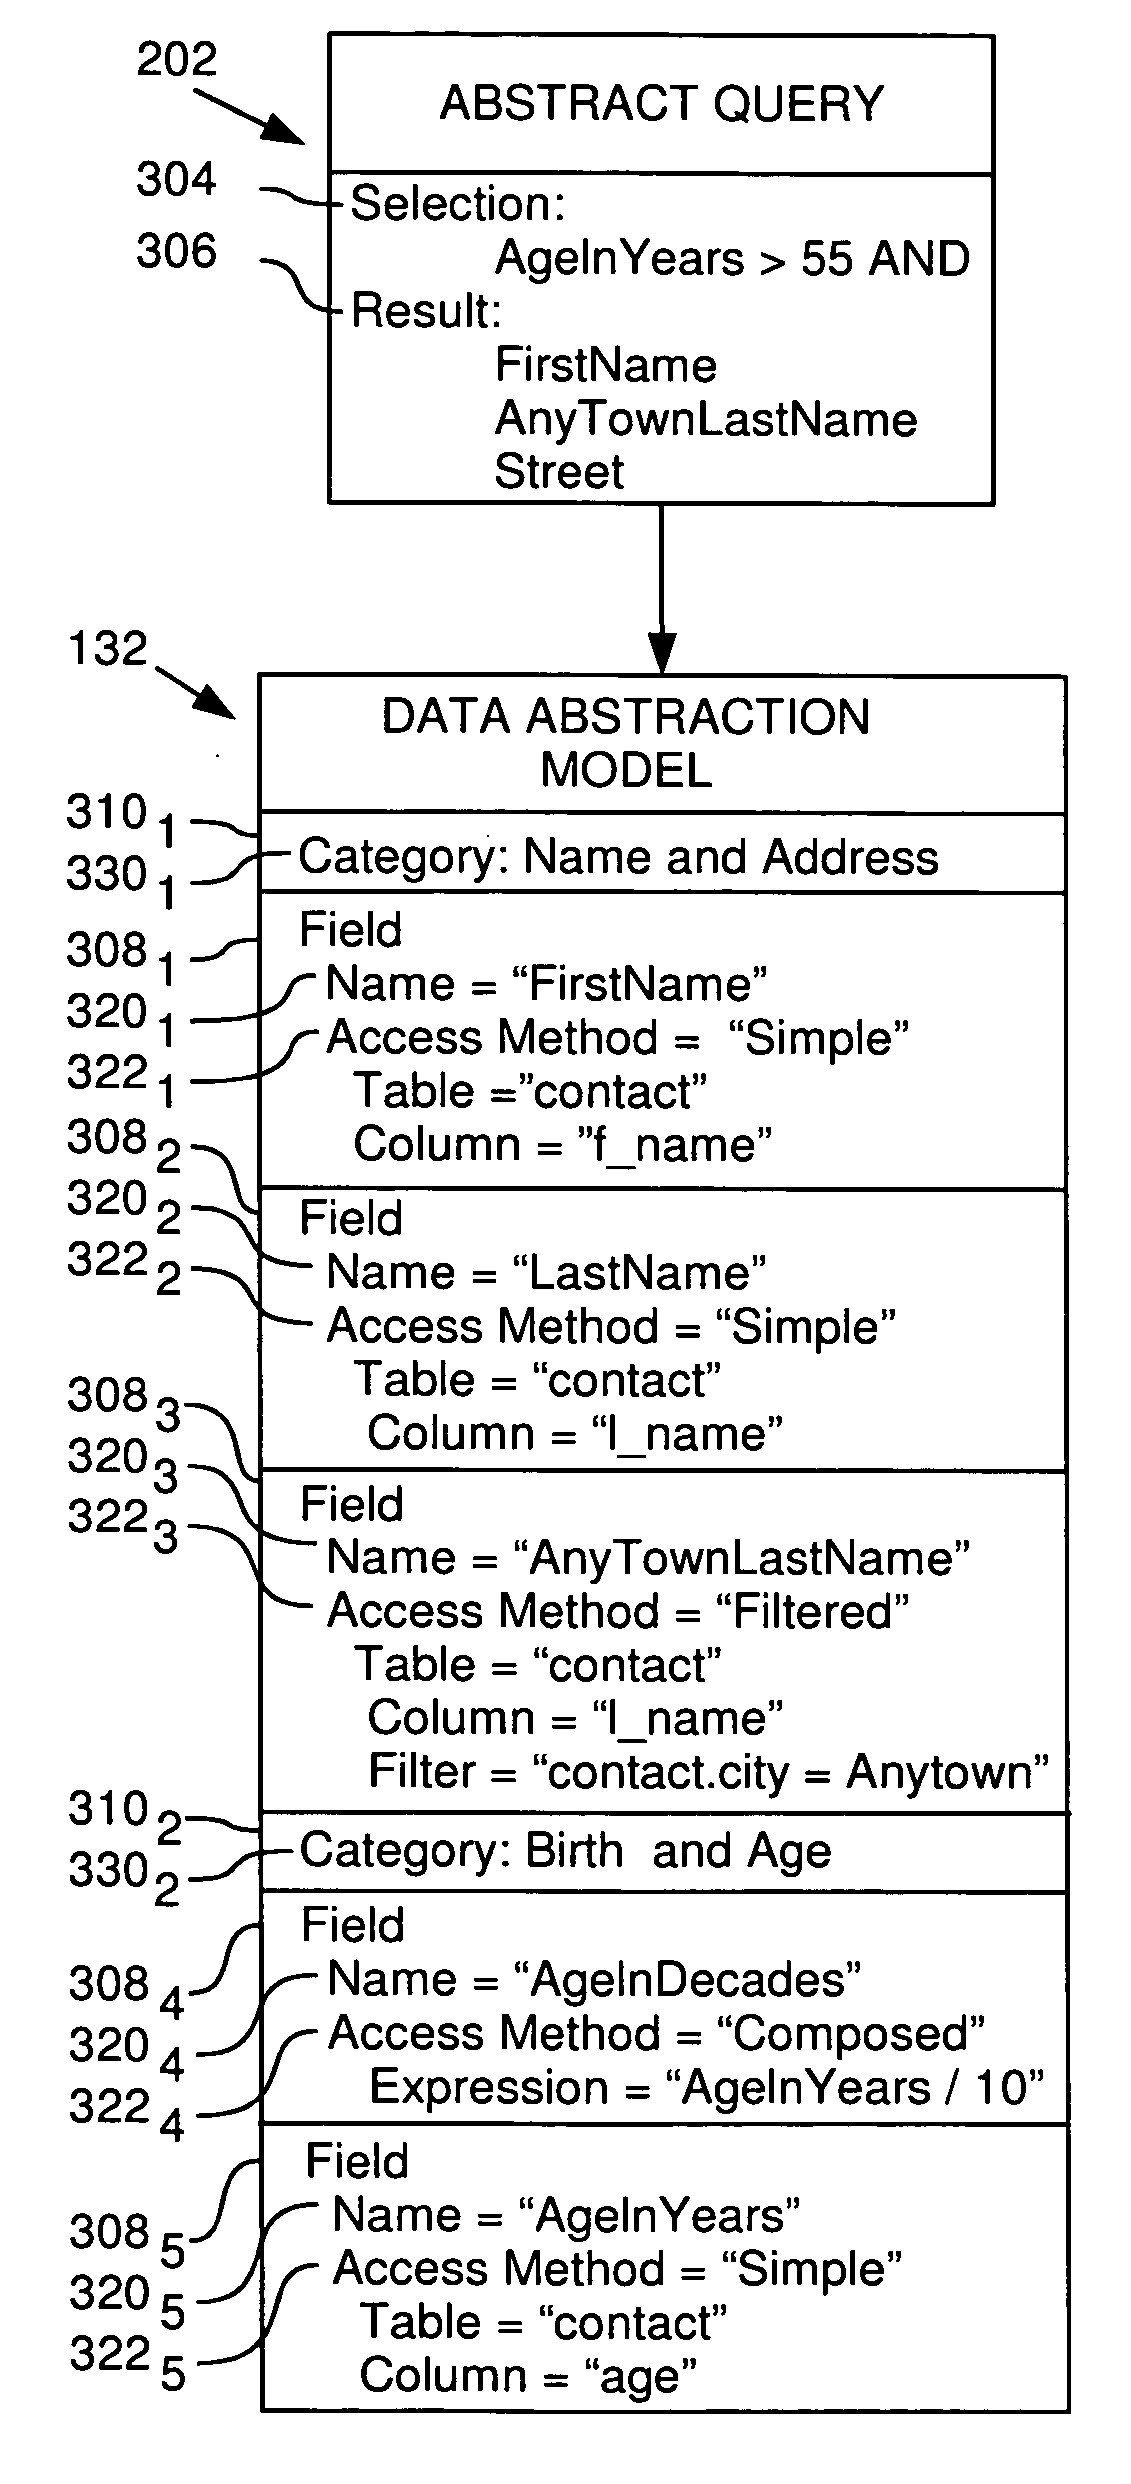 Techniques for managing access to physical data via a data abstraction model